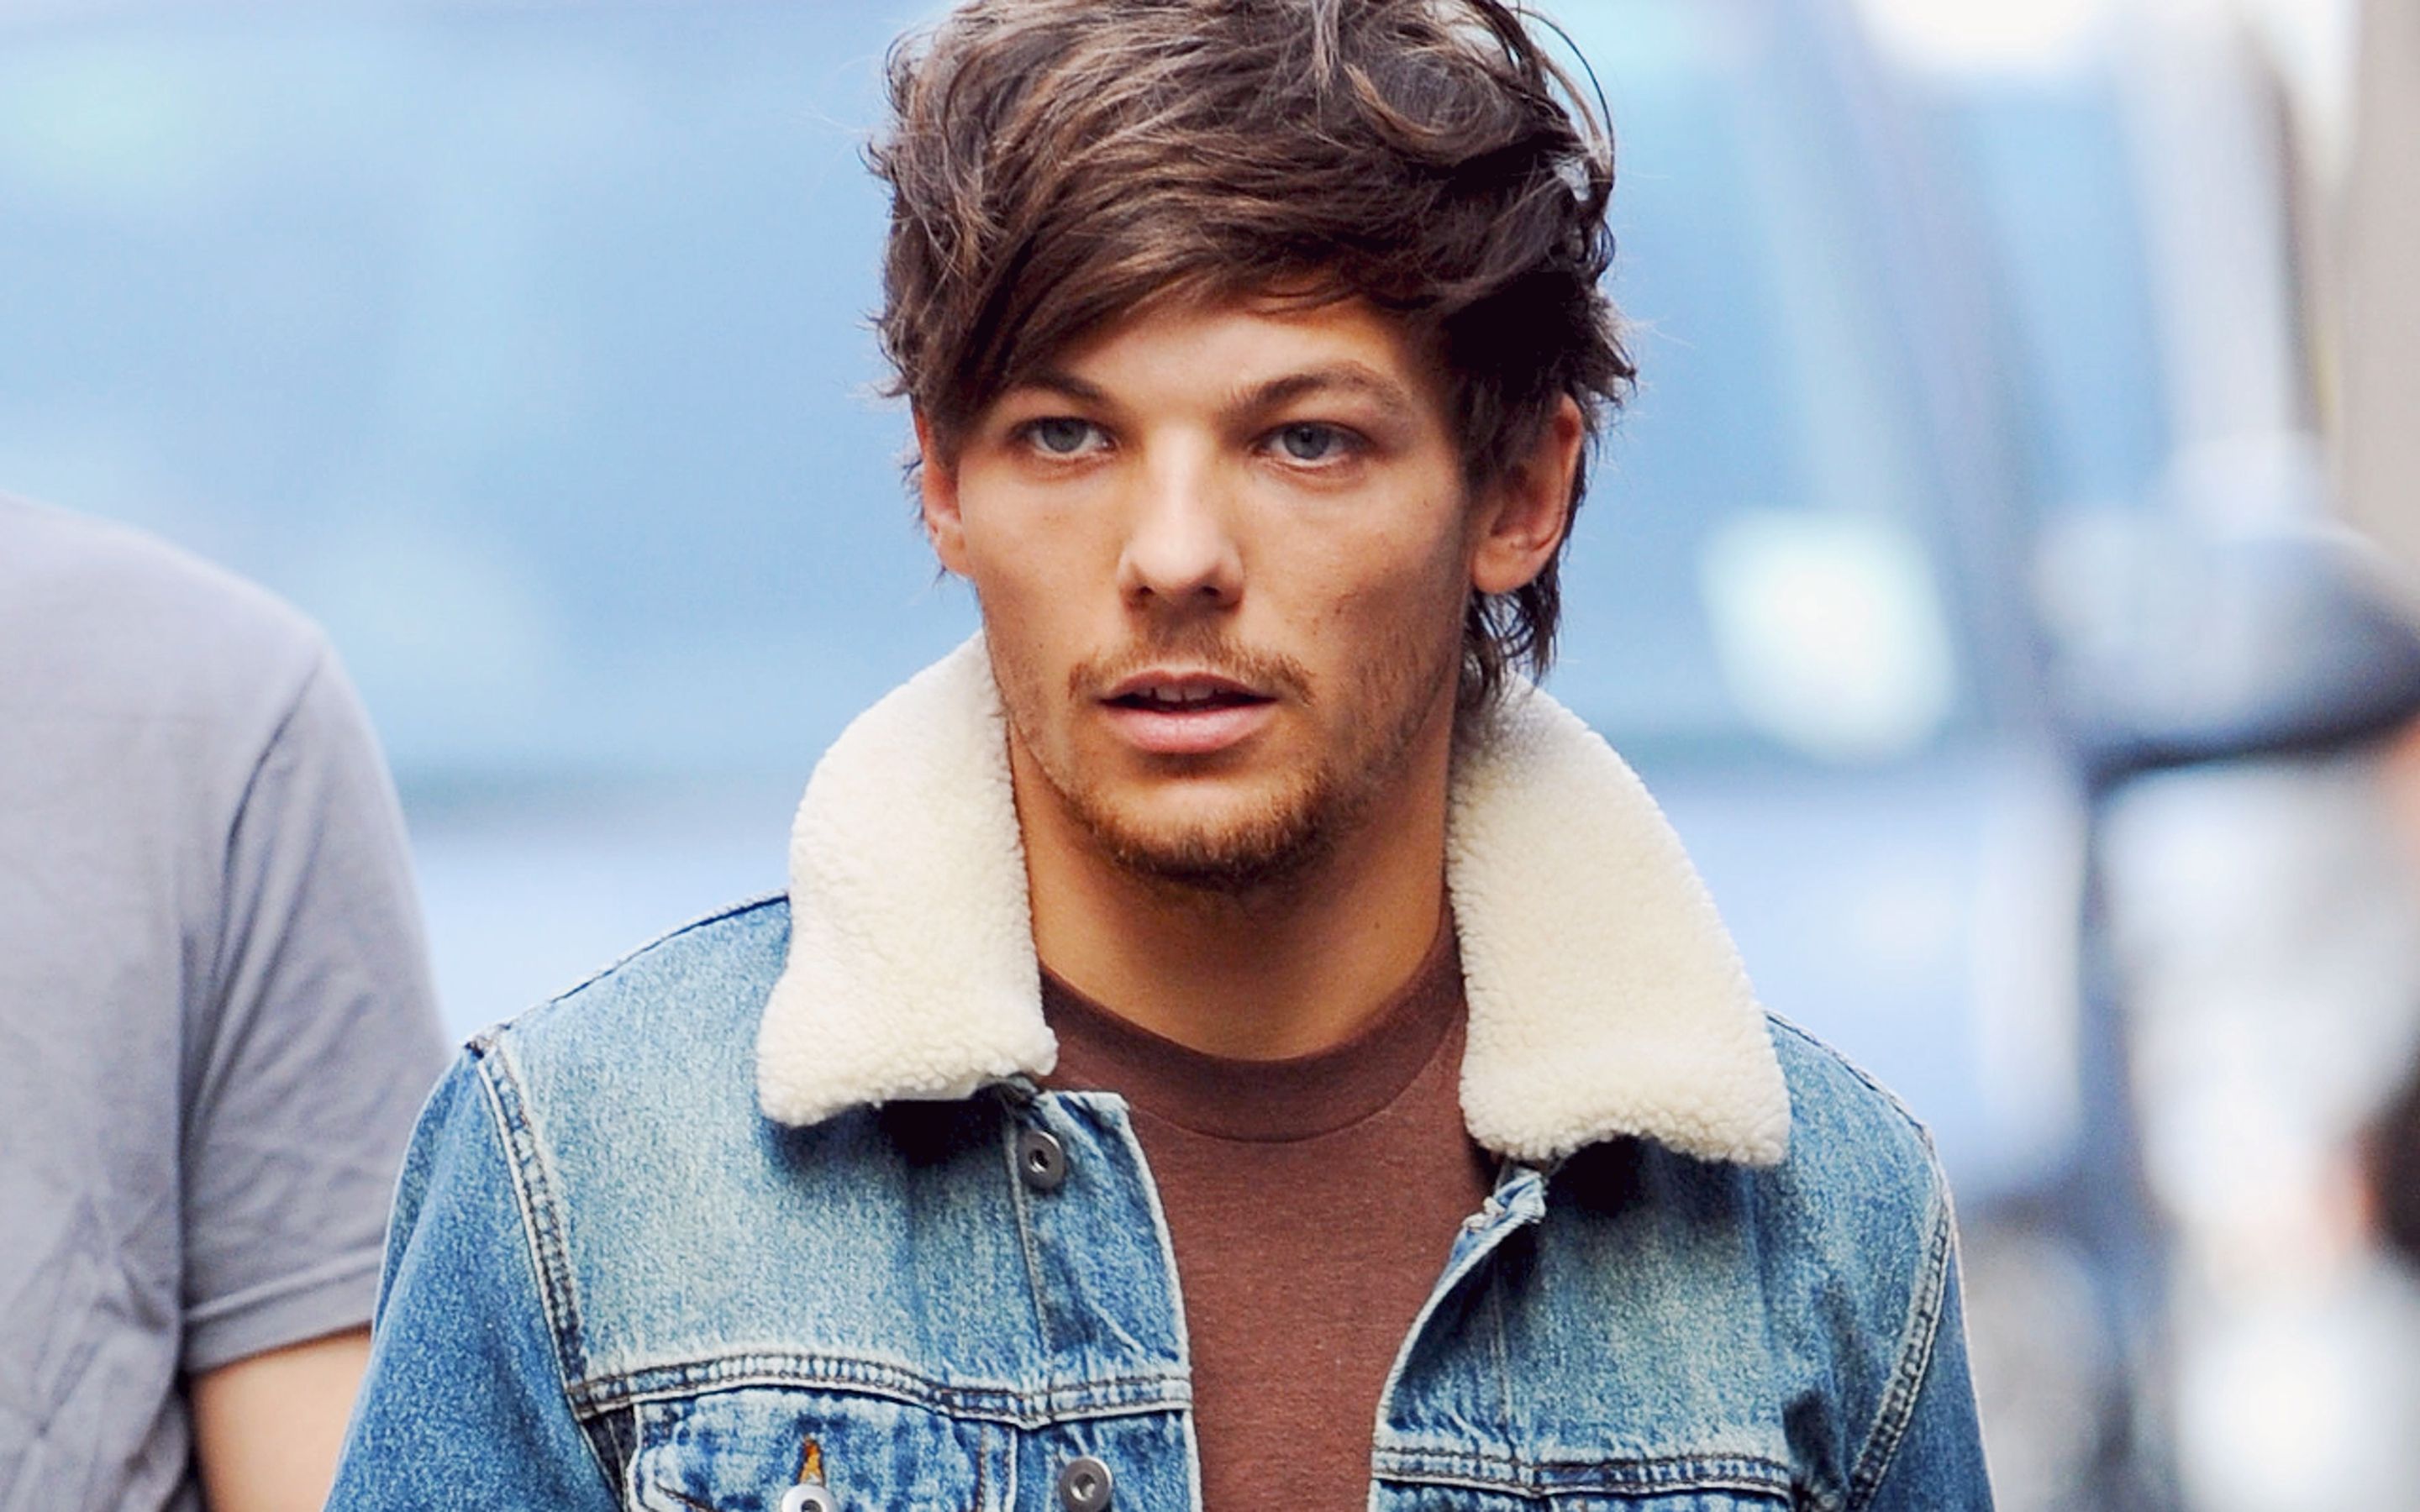 Louis Tomlinson Wallpaper Image Photo Picture Background